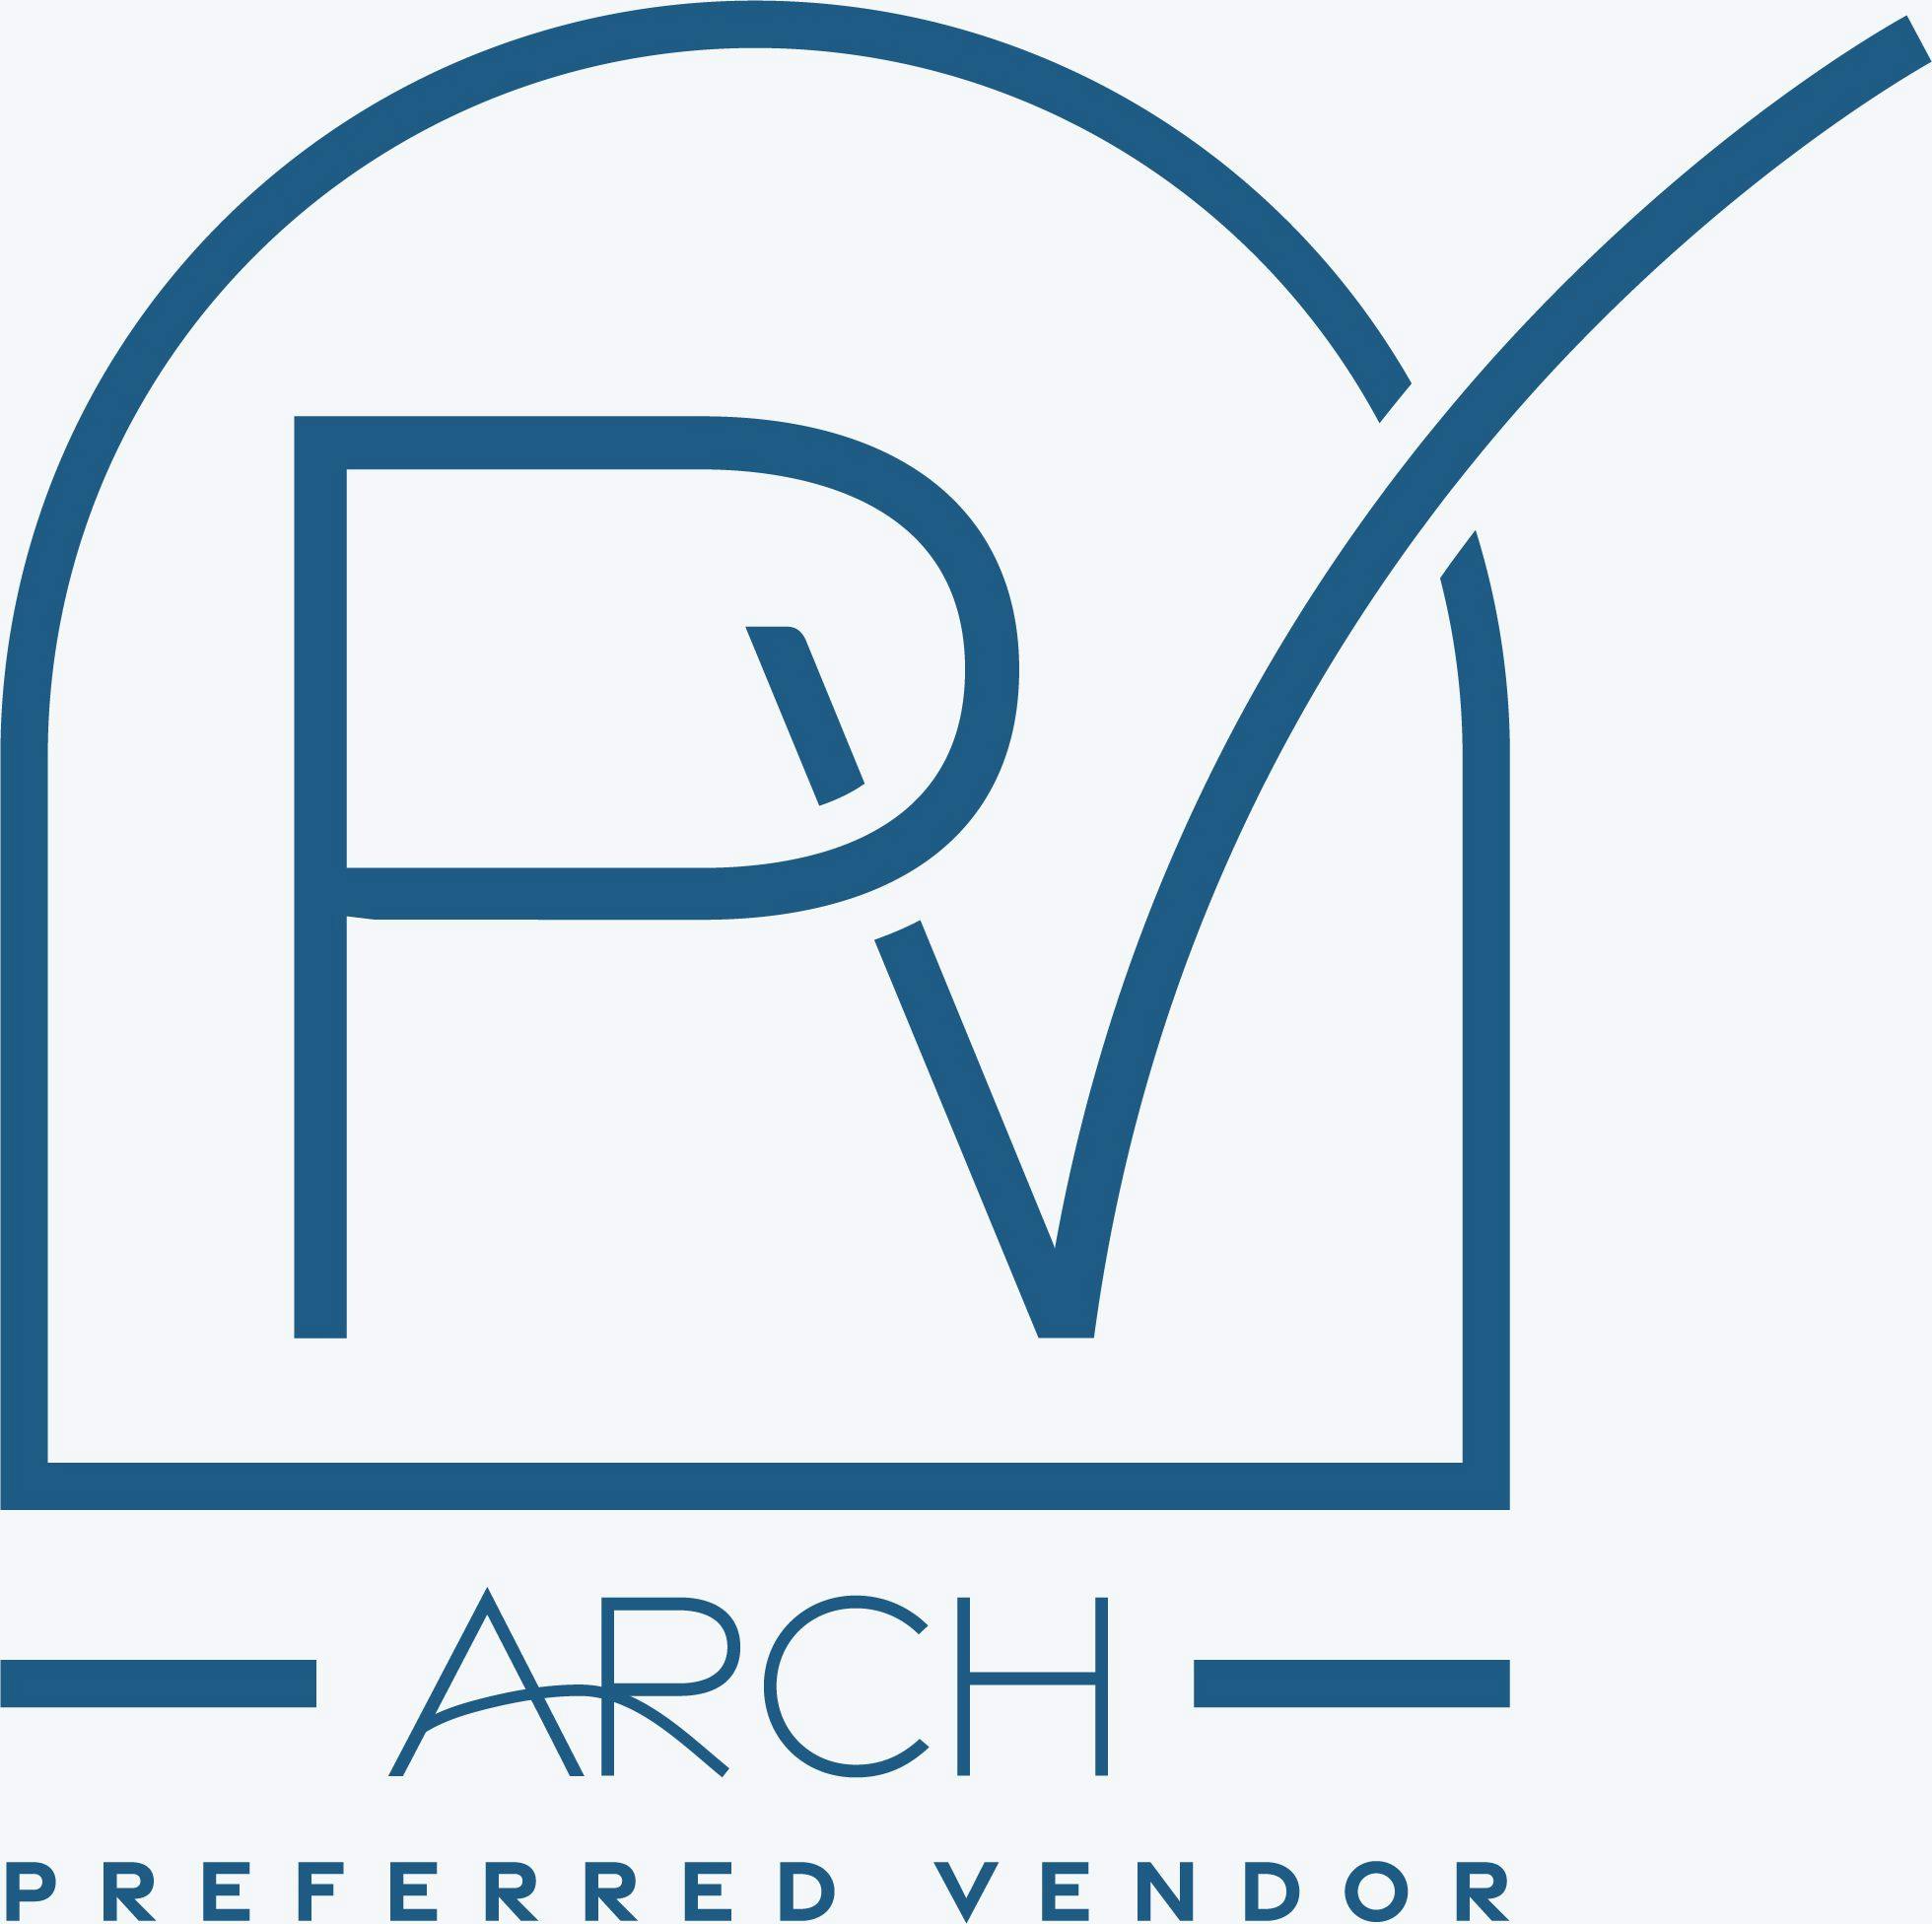 File Type: png,

Mime Type: image/png,

Color Space: RGB with Alpha,

Text from attachment: pv arch preferred vendor,

Created At: 2023-01-06T18:38:20.096Z,

Asset Name: Preferred Vendor - Logo Badge - Blue